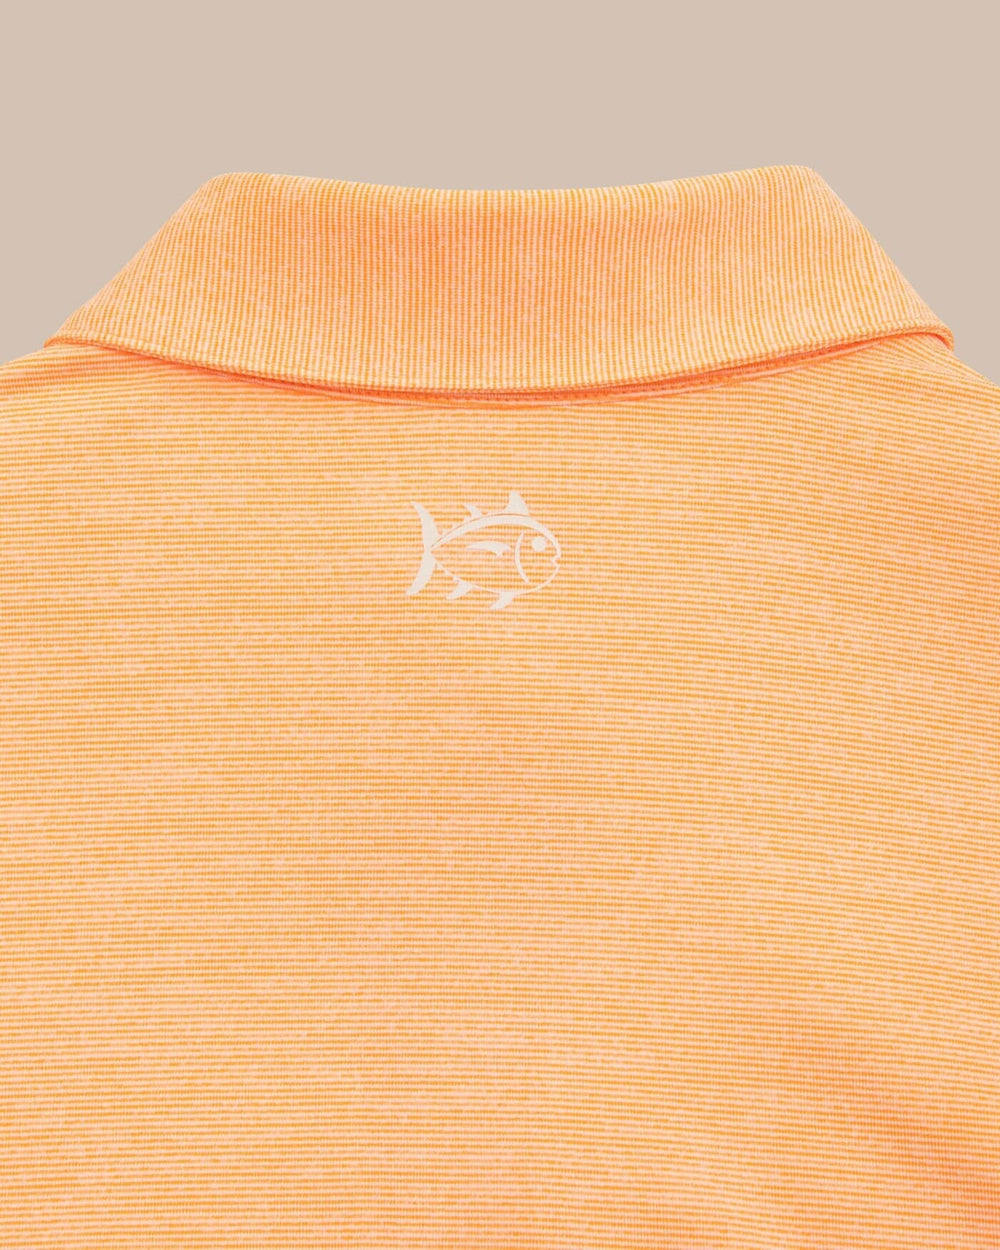 The yoke view of the Team Colors Driver Spacedye Polo Shirt by Southern Tide - Rocky Top Orange